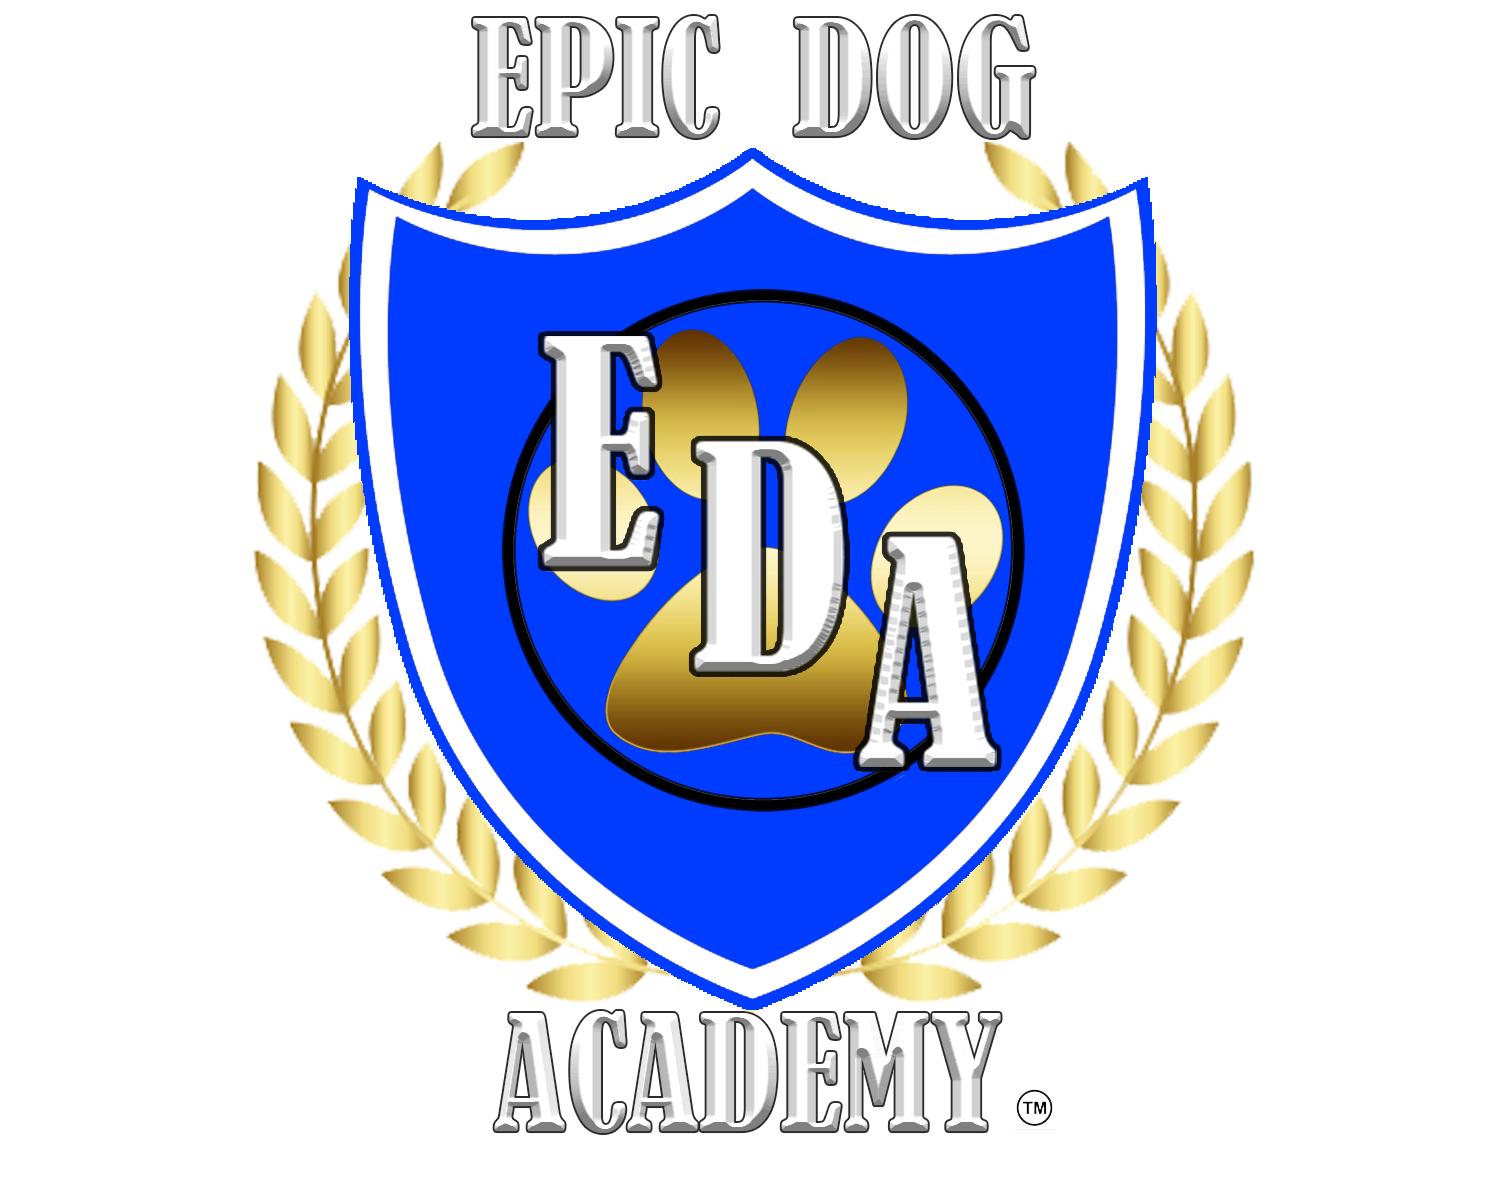 Epic Dog Academy opens its doors in Temecula Valley